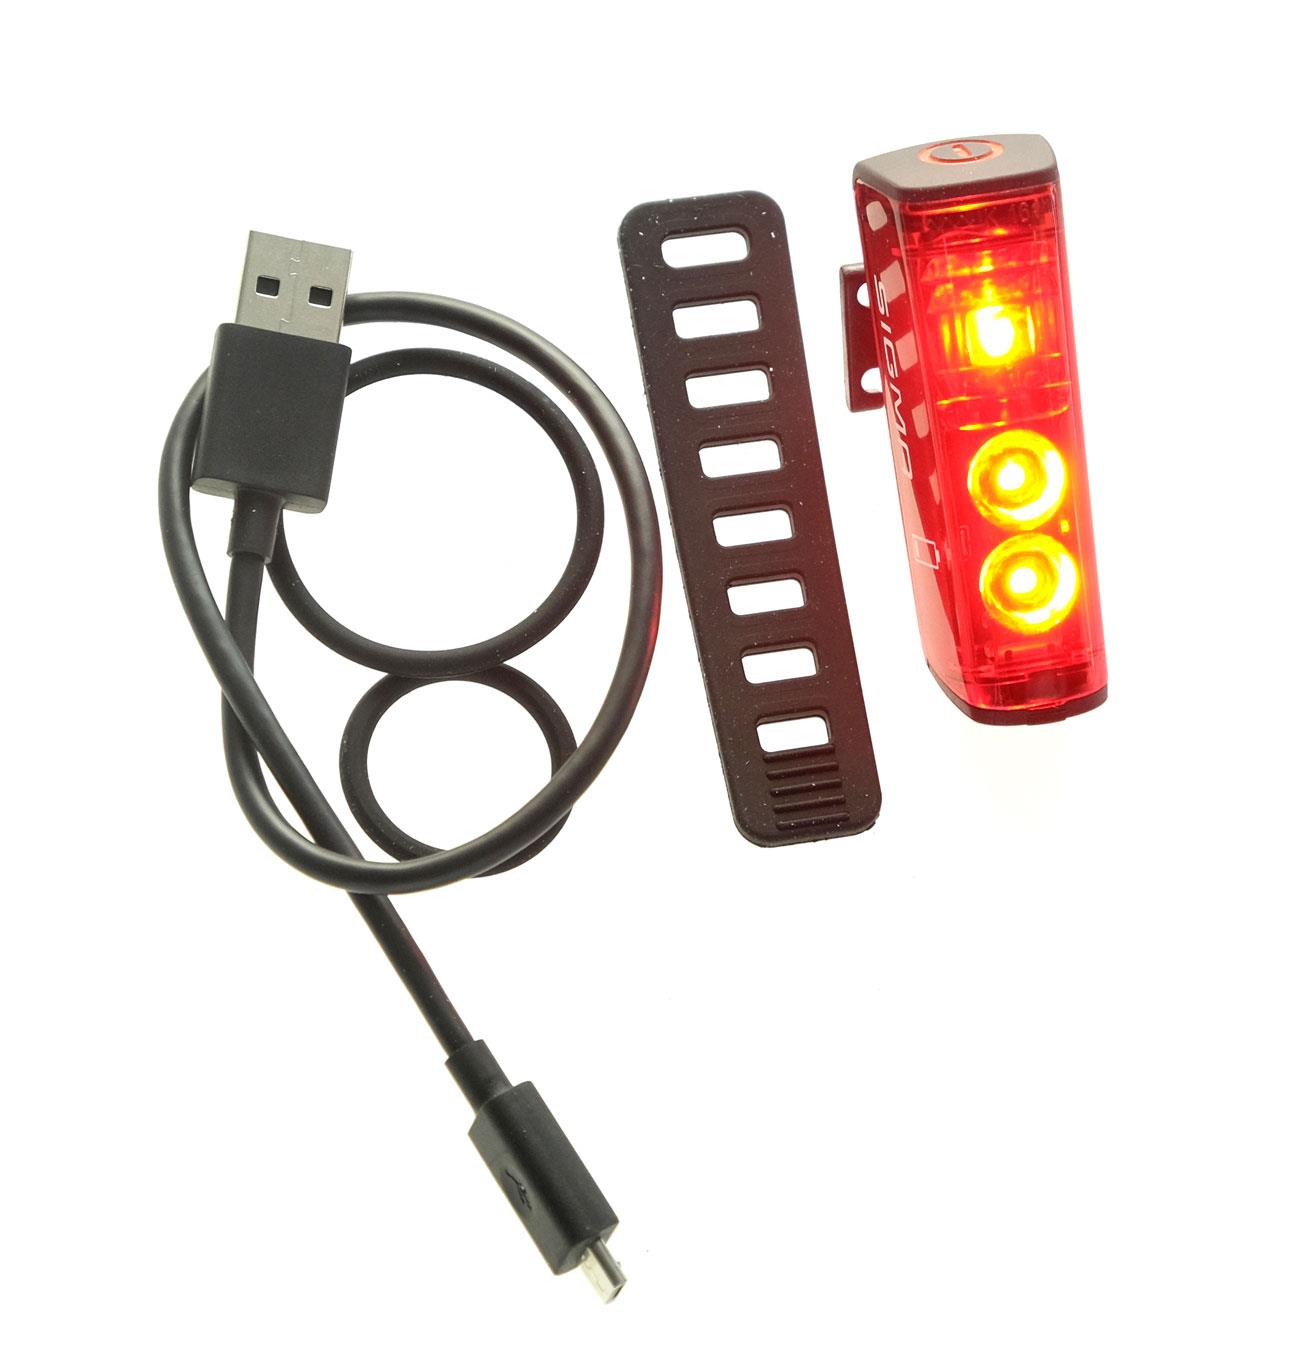 SIGMA SPORT rechargeable LED rear light Blaze USB with brake light function